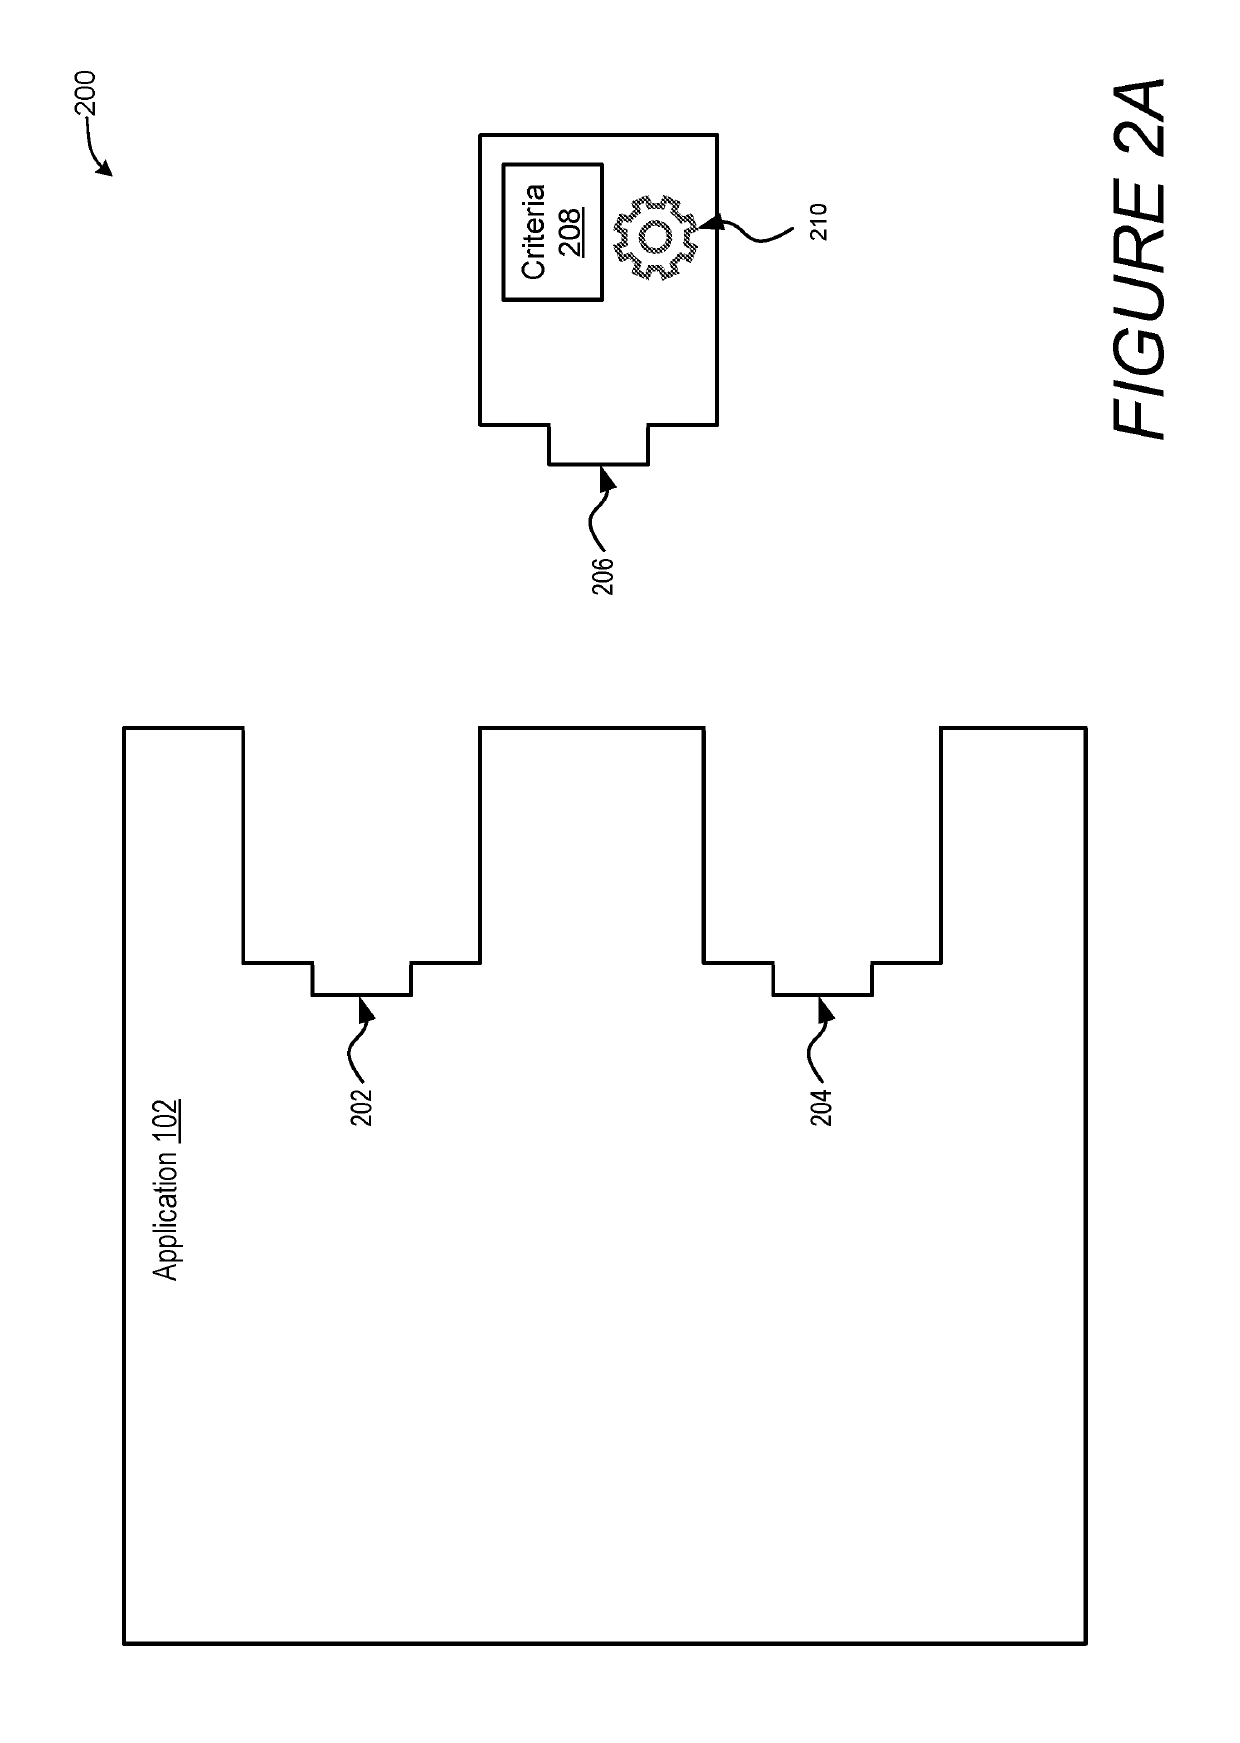 Enhanced processing and communication of file content for analysis